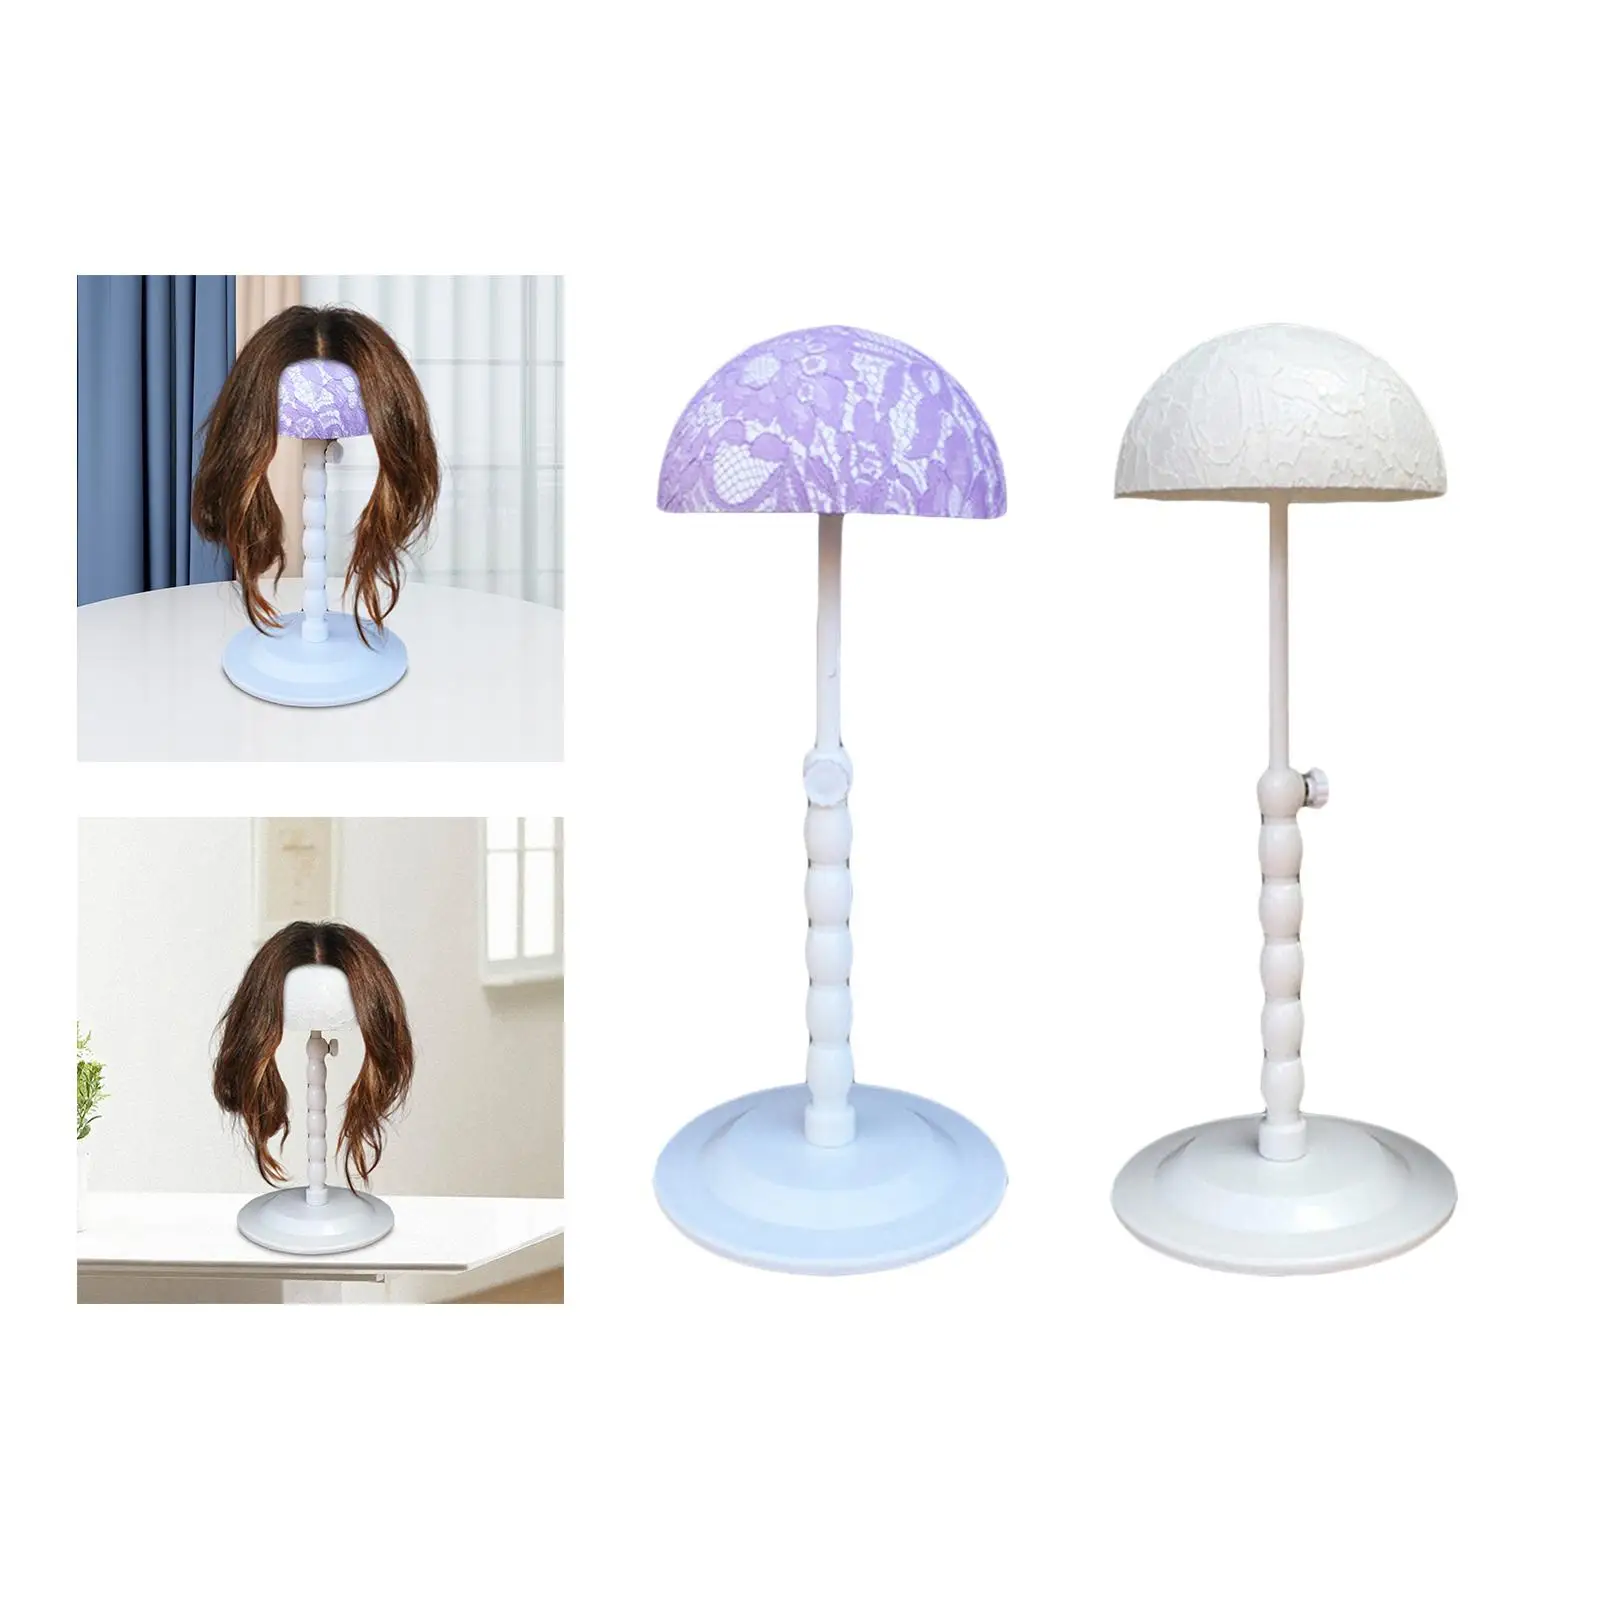 Wig Stand Adjustable Height Portable Stable Lightweight No Slip Hat Display Stand Wig Holder for Home Shop Drying Styling Travel